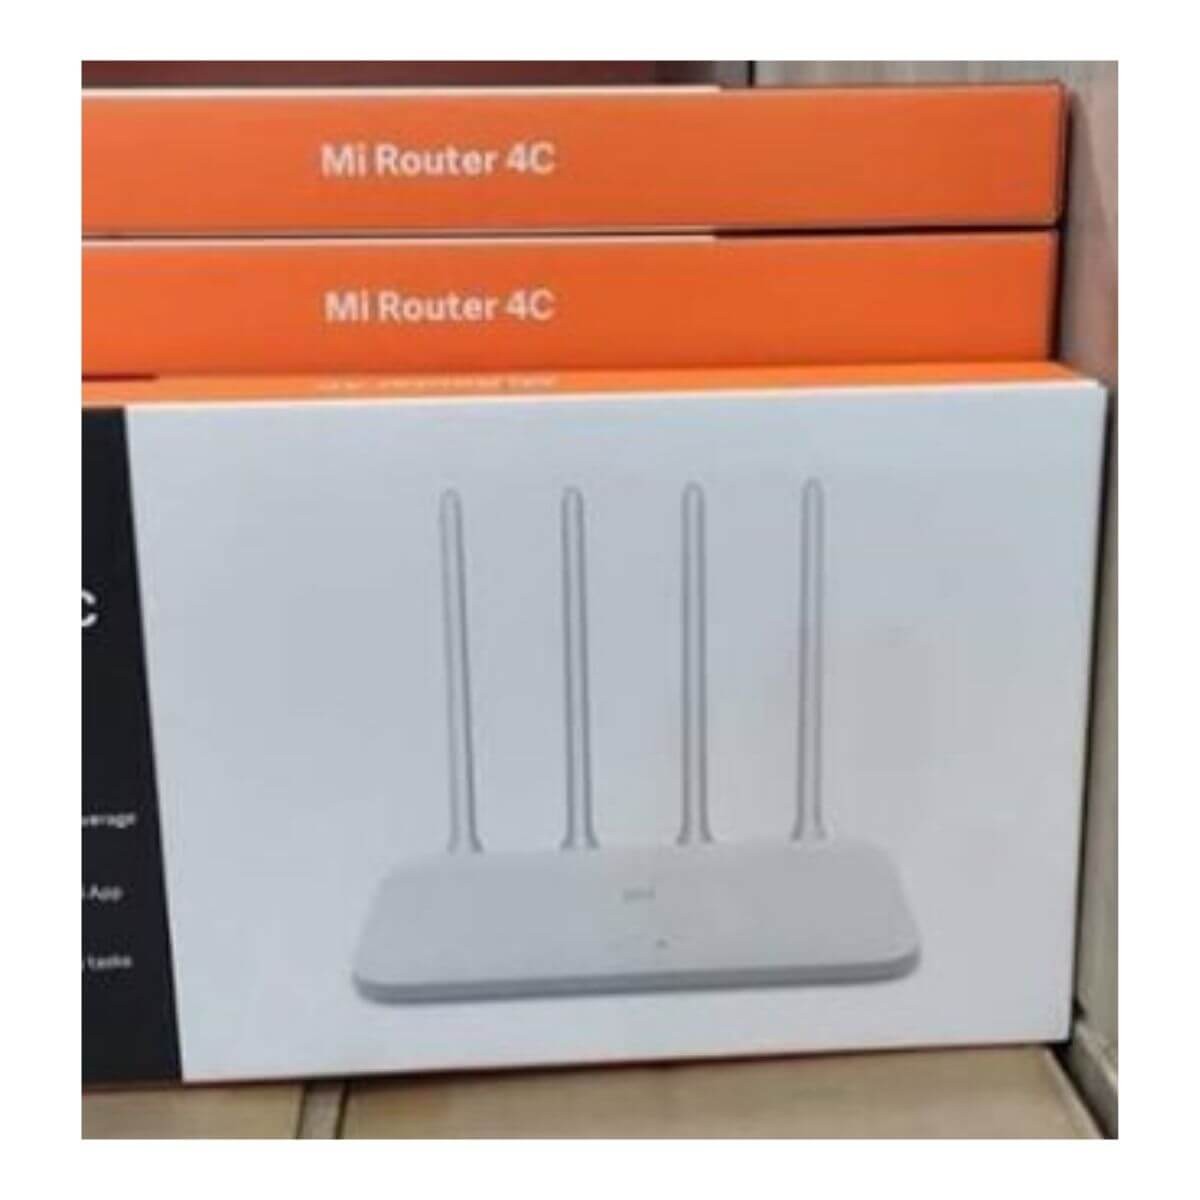 Mi 4c Chinese Router BD